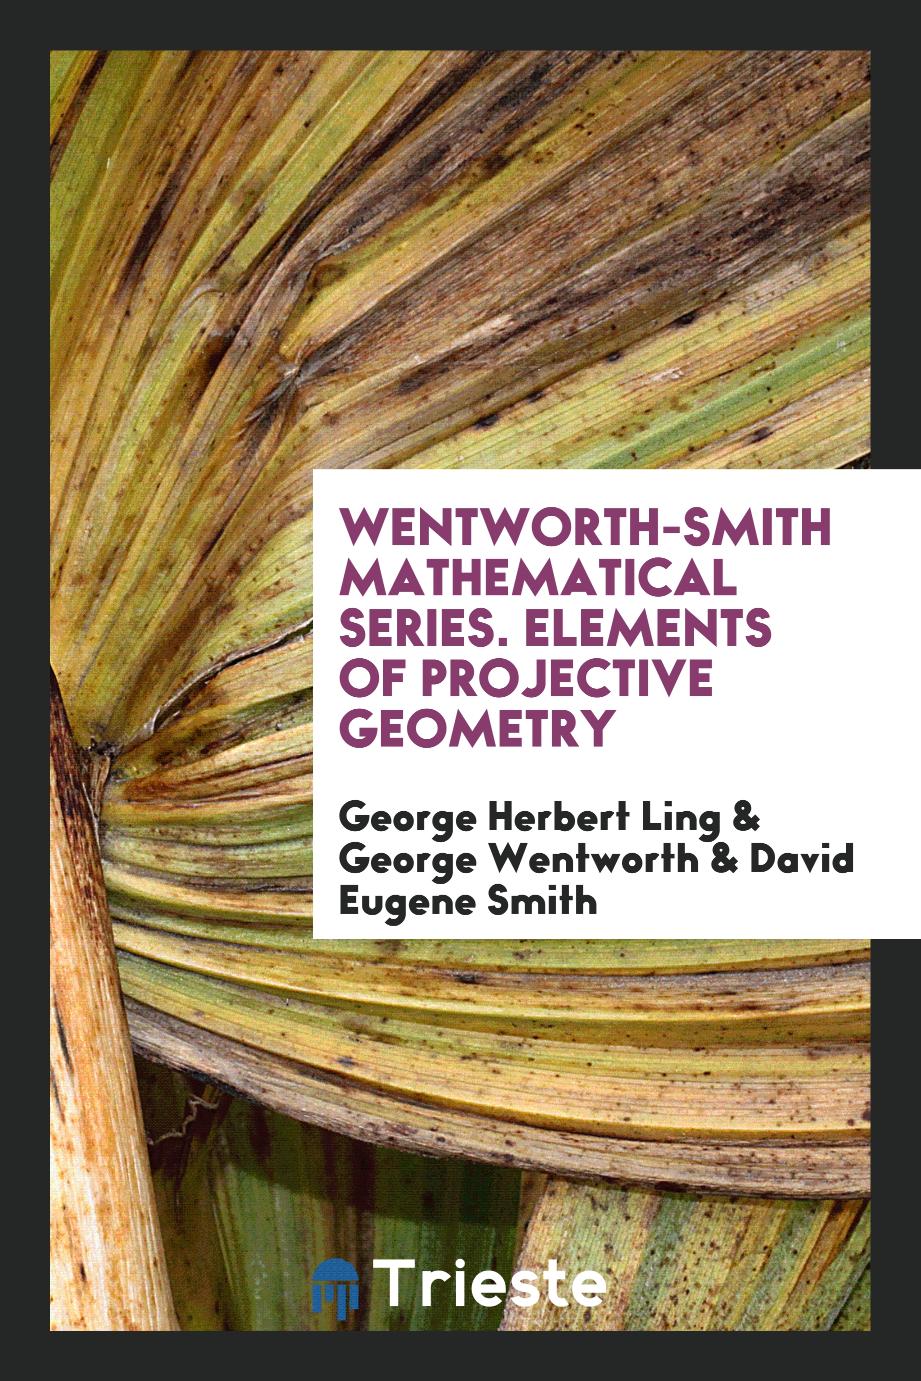 Wentworth-smith mathematical series. Elements of projective geometry